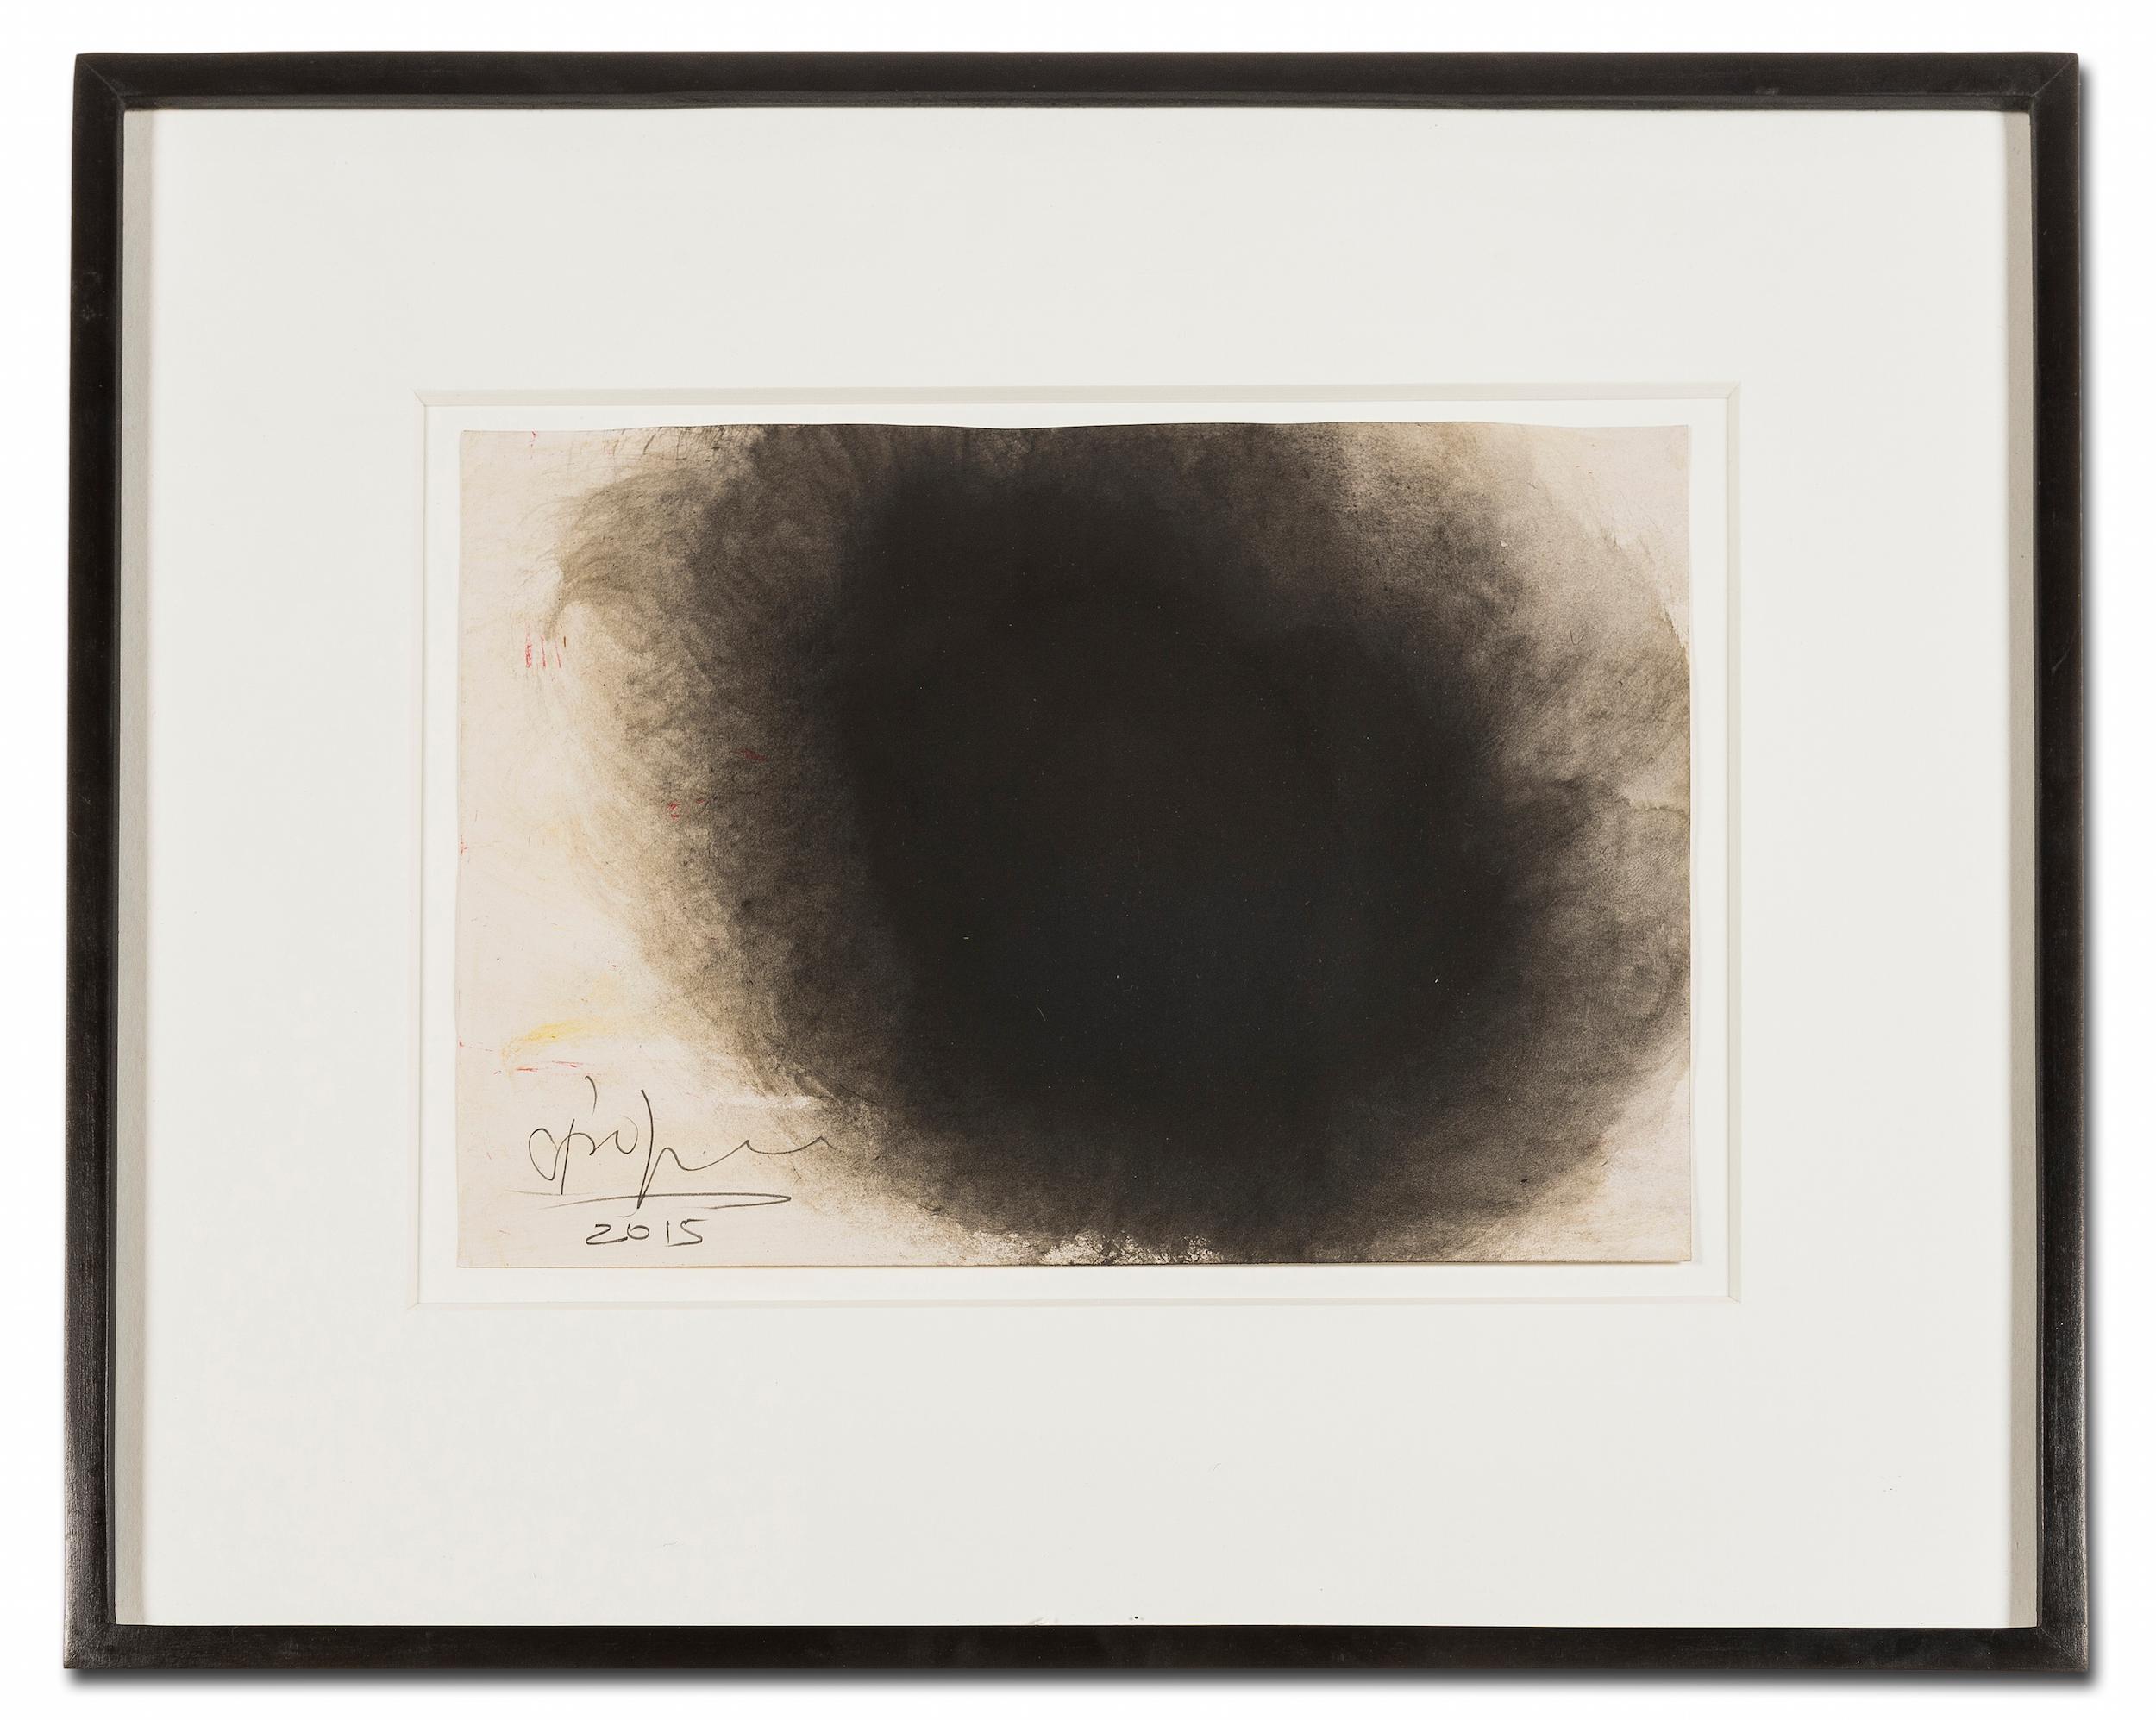 ANISH KAPOOR
Untitled, 2015

Ink and gouache on paper 
Signed and dated in pencil
Sheet: 21.0 x 29.5 cm (8.3 x 11.6 in)

Provenance: 
Private Collection, UK.
The Drawing Room, London, UK.